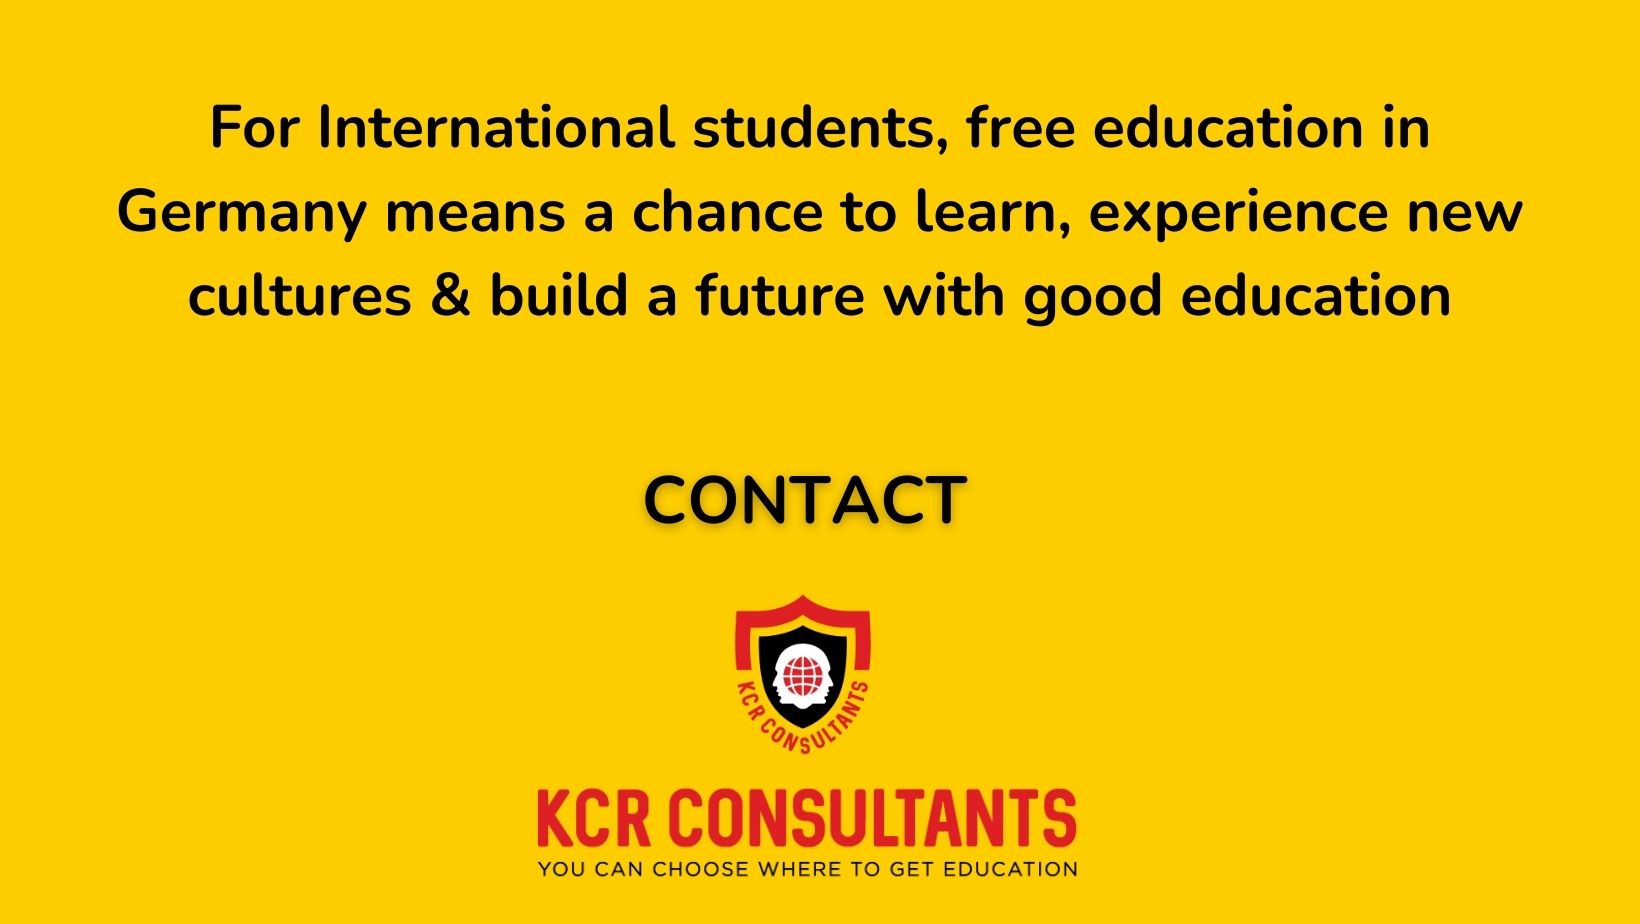 STUDY FREE IN GERMANY - KCR CONSULTANTS - Contact us